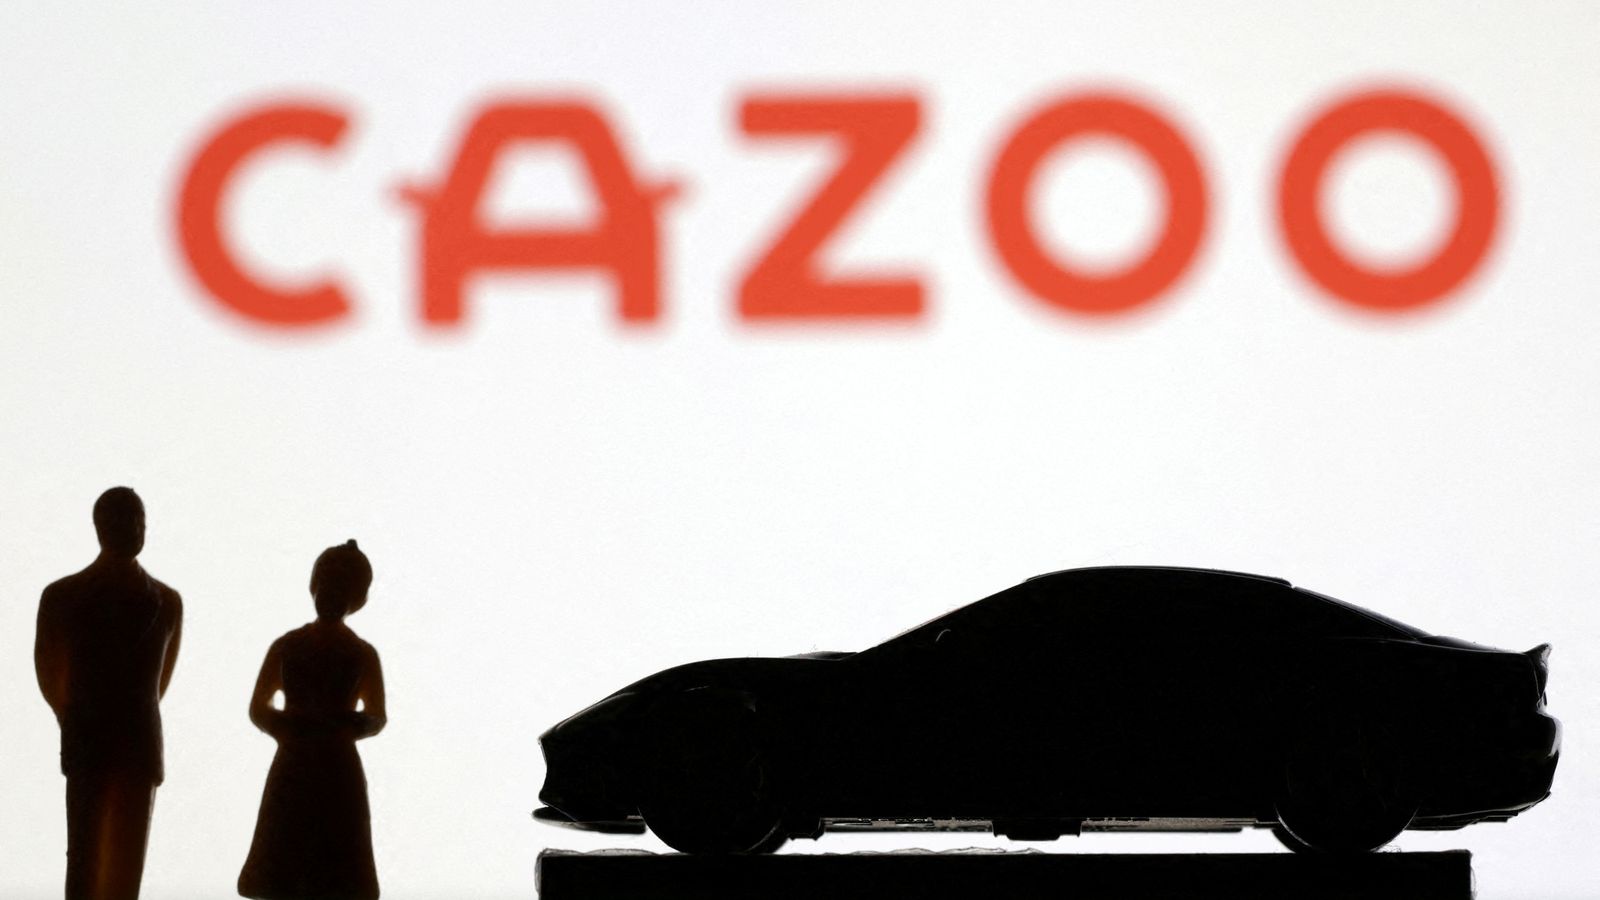 Motors.co.uk lines up deal to buy stricken car marketplace Cazoo